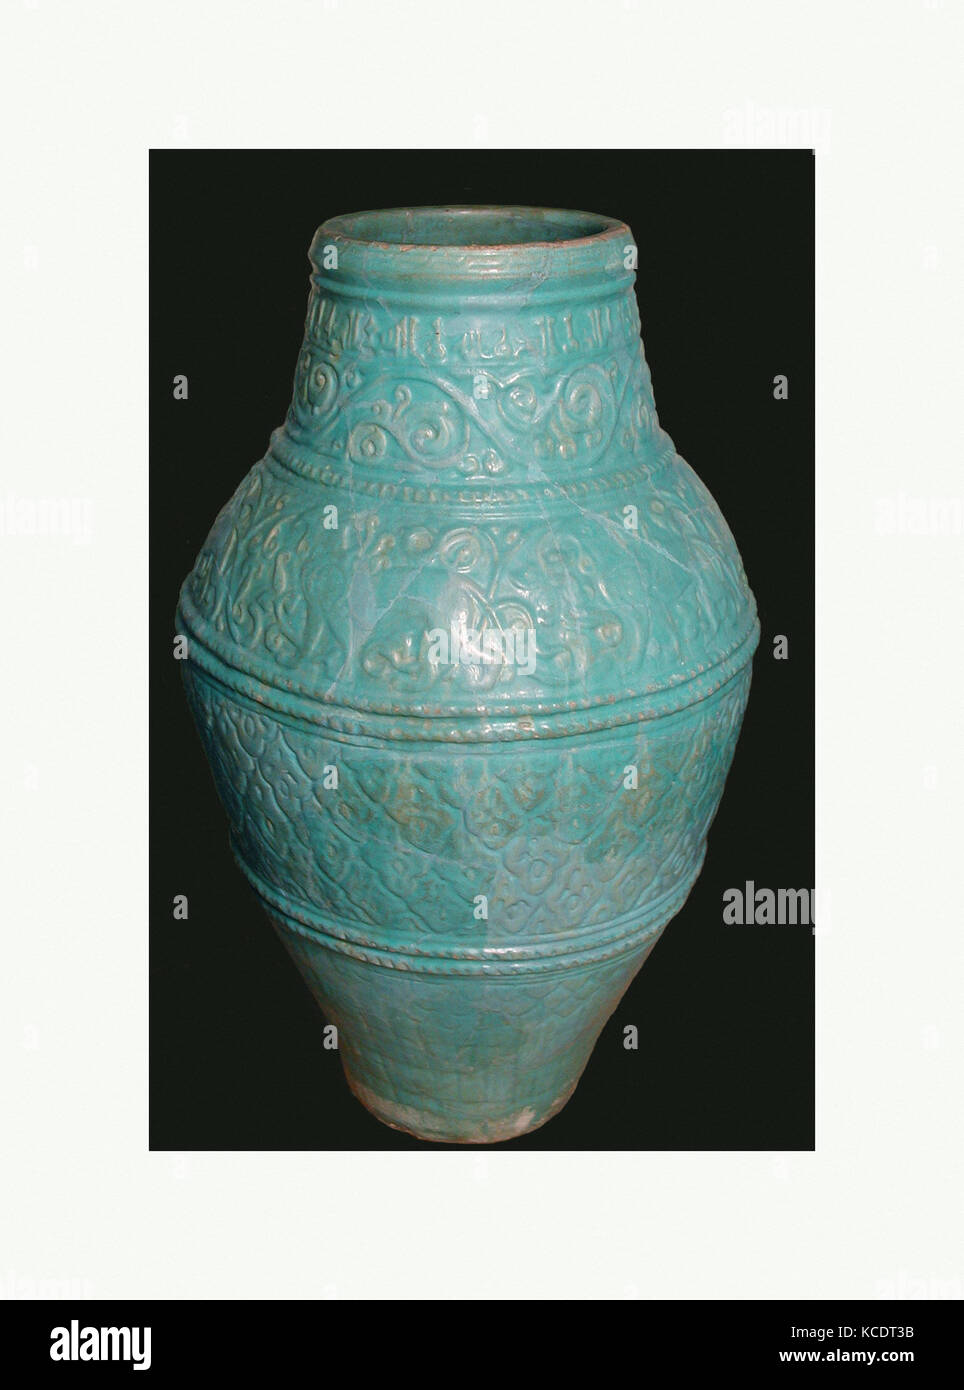 Large Turquoise Jar, 12th–13th century, Made in Iran, Earthenware; molded and glazed, H. 31 1/2 in. (80 cm), Ceramics, This Stock Photo